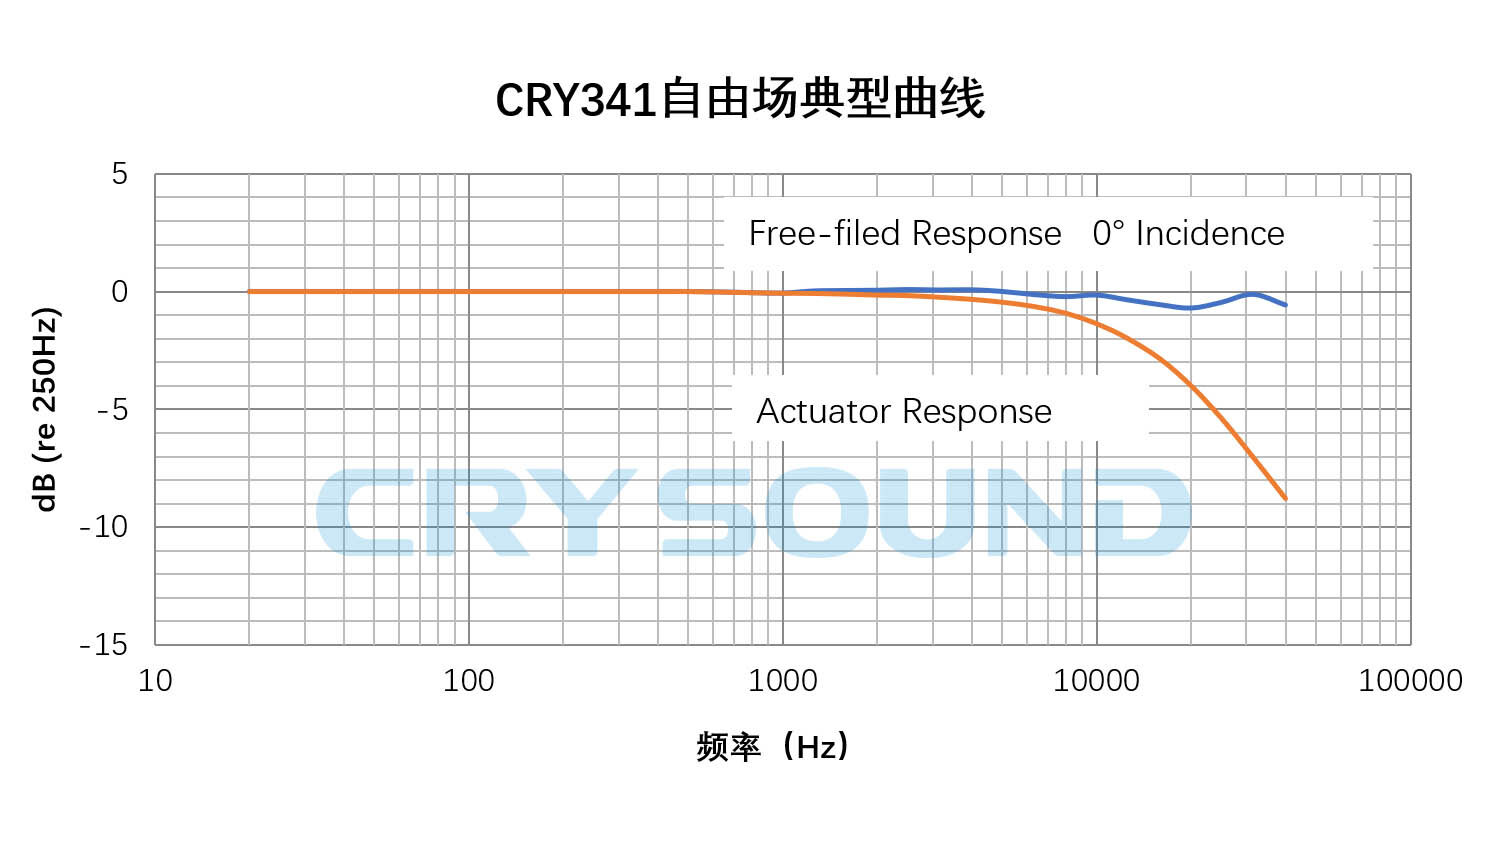 Typical frequency response curve of CRY341